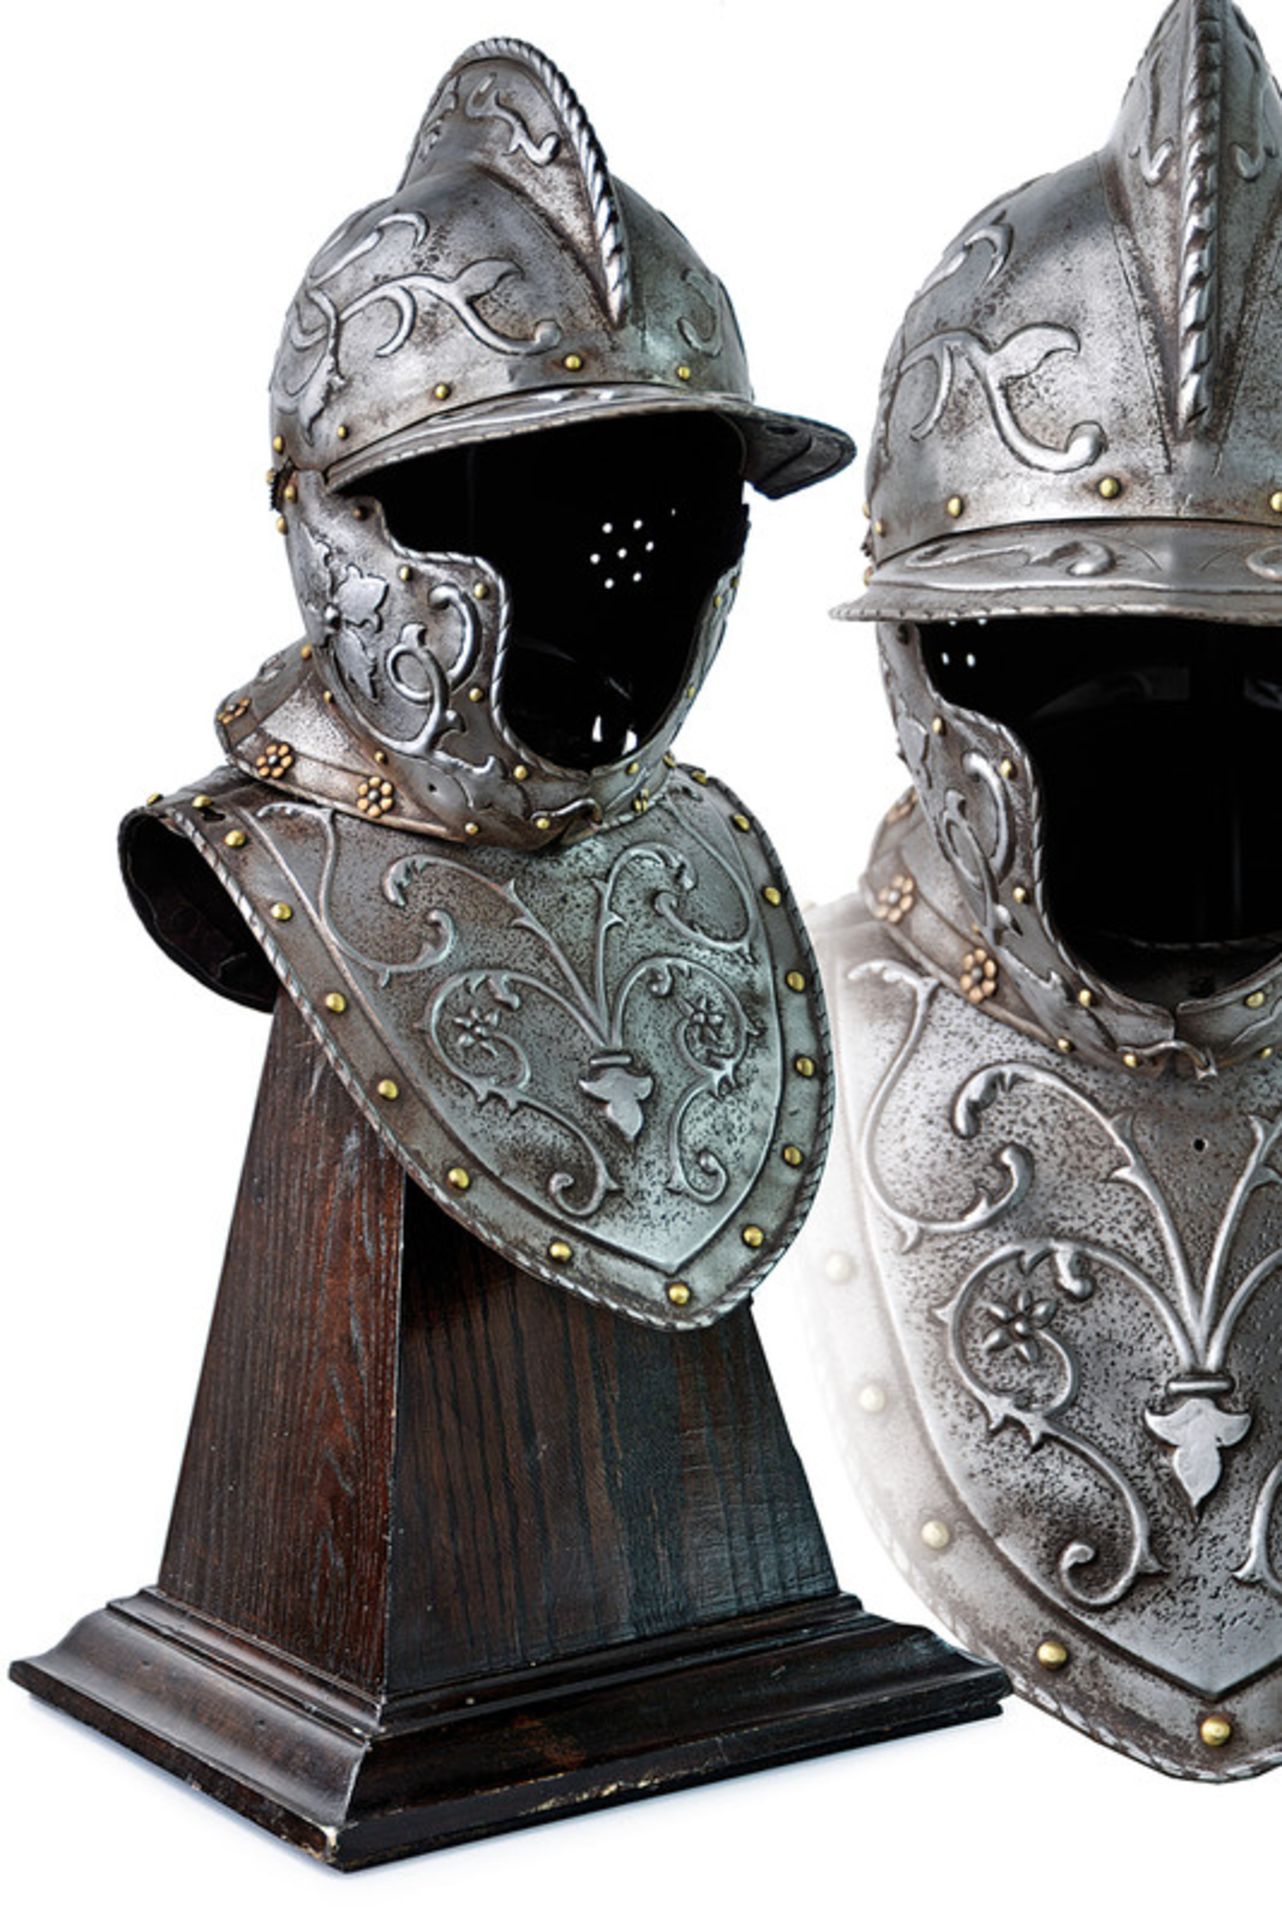 A burgonet with gorget dating: 19th Century provenance: Europe Helmet with comb, twisted border